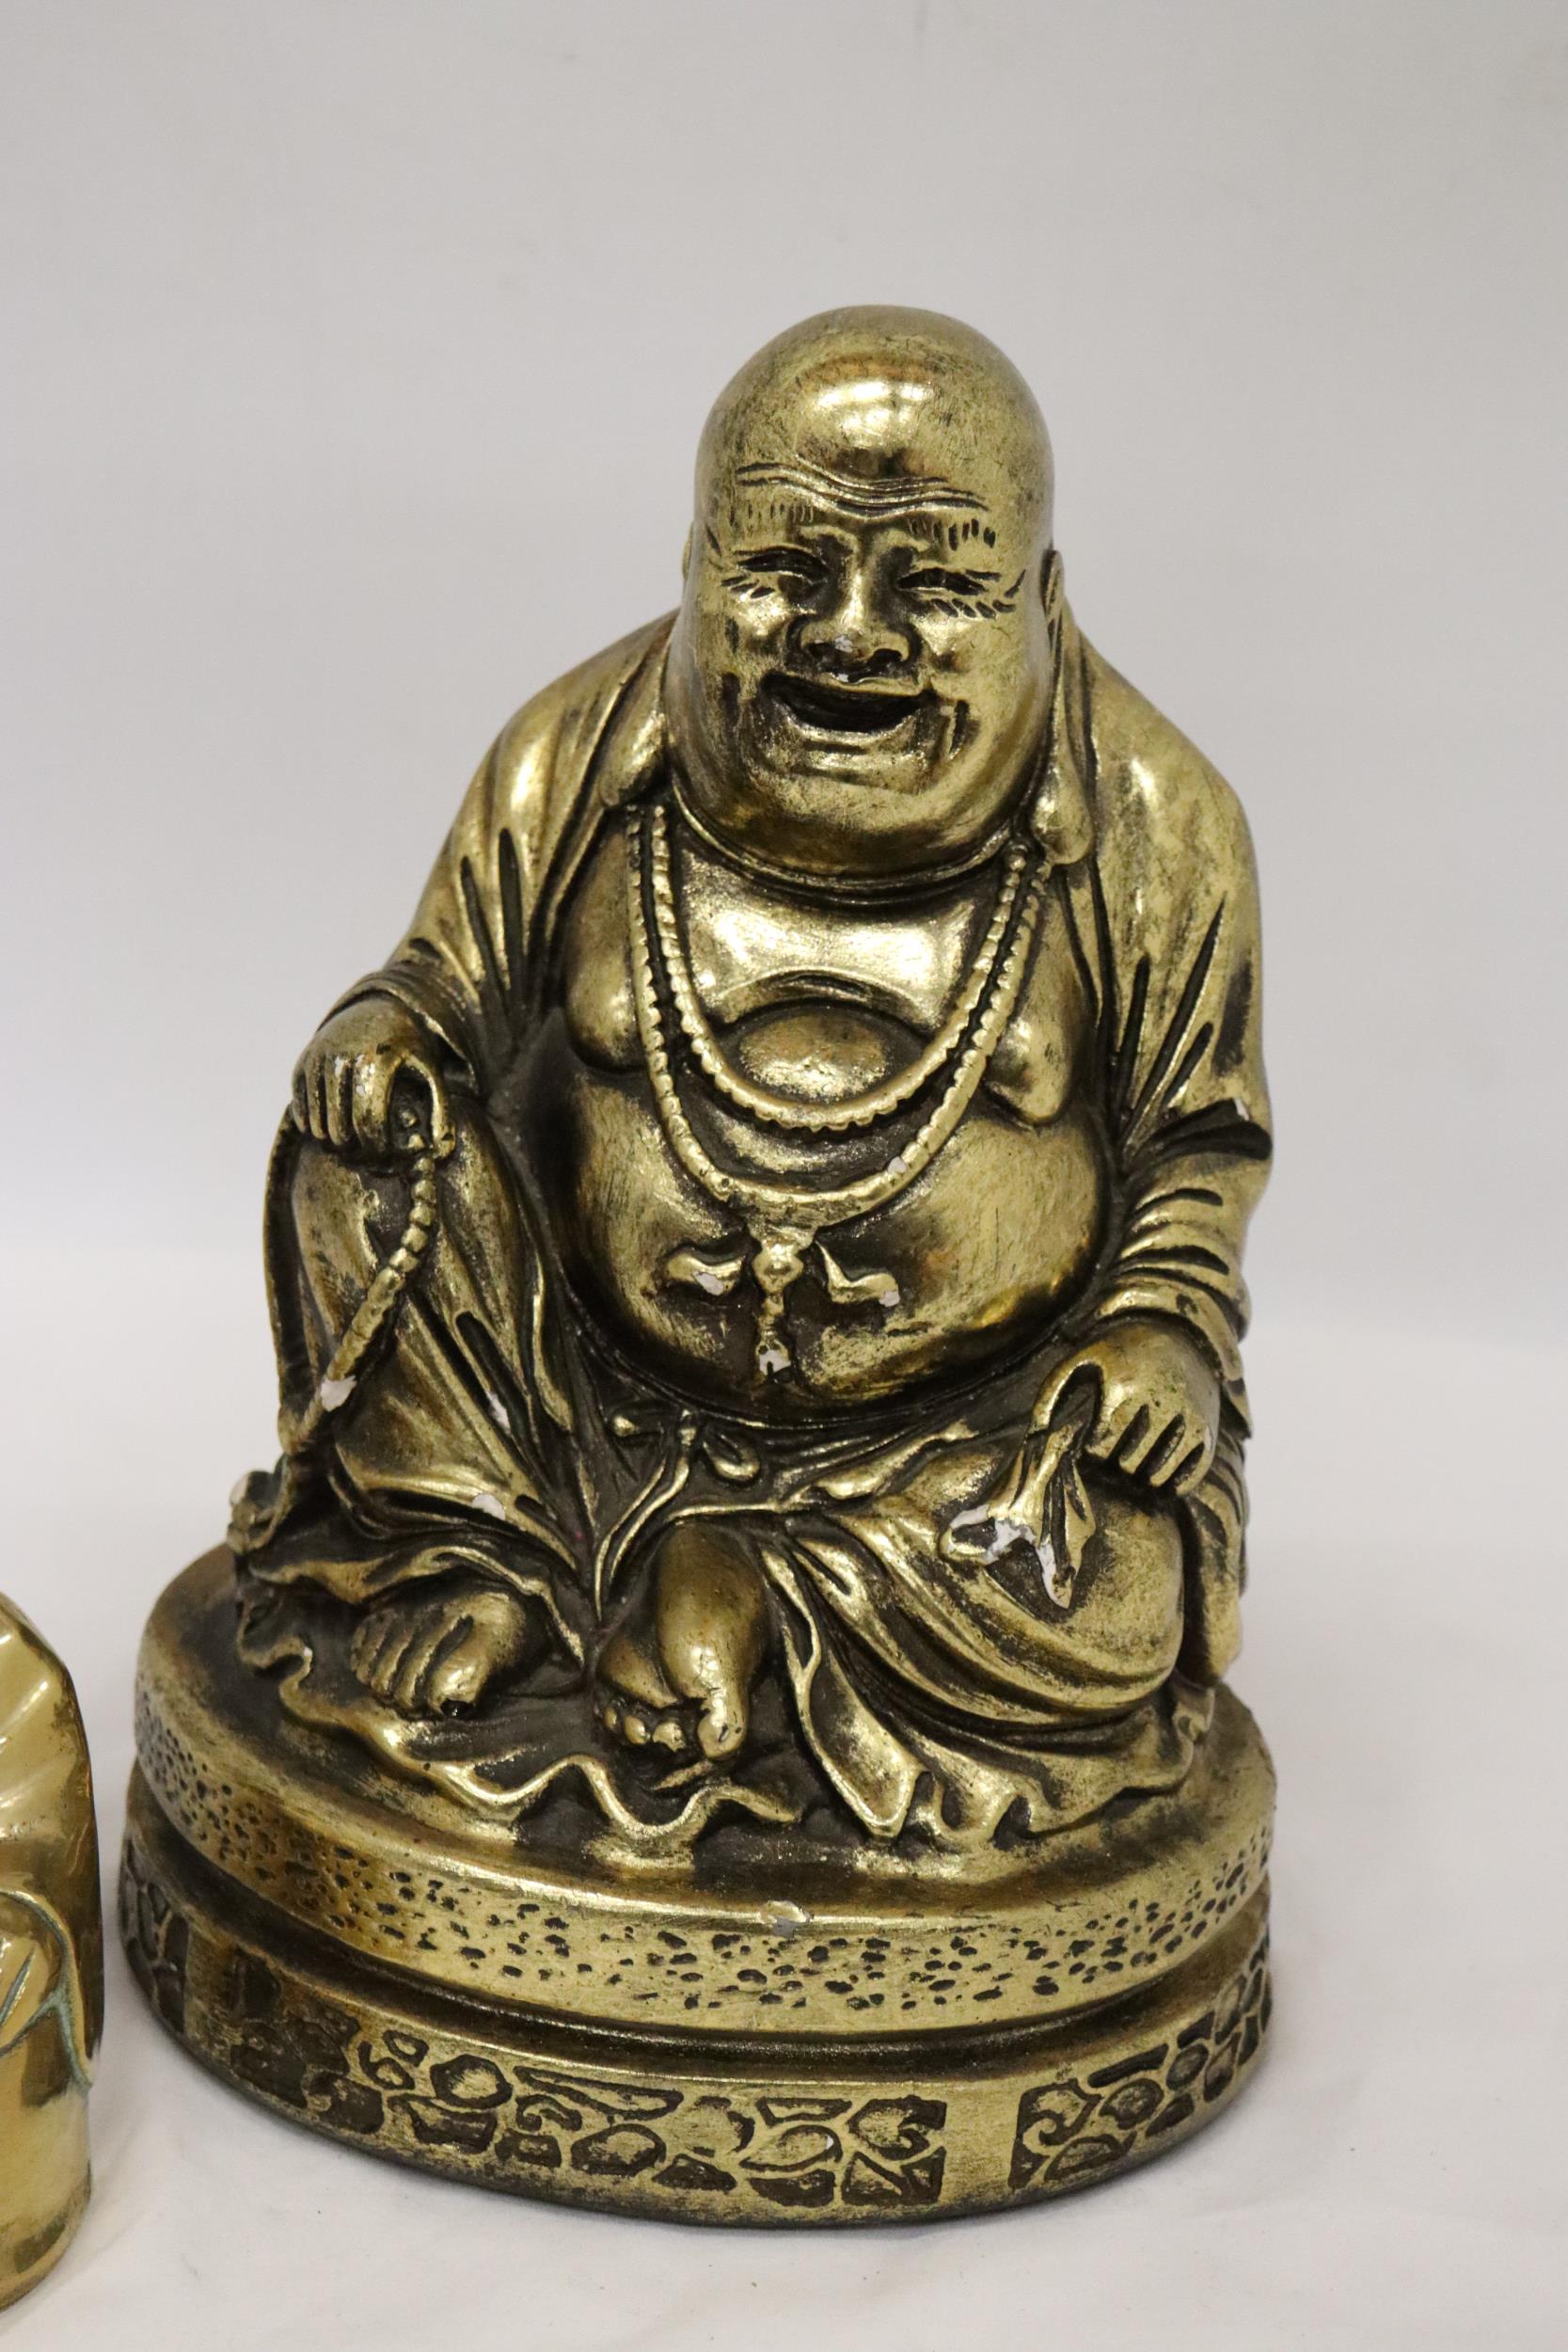 A LARGE RESIN LAUGHING BHUDDA TOGETHER WITH A SMALL BRASS LAUGHING BHUDDA - Image 3 of 7